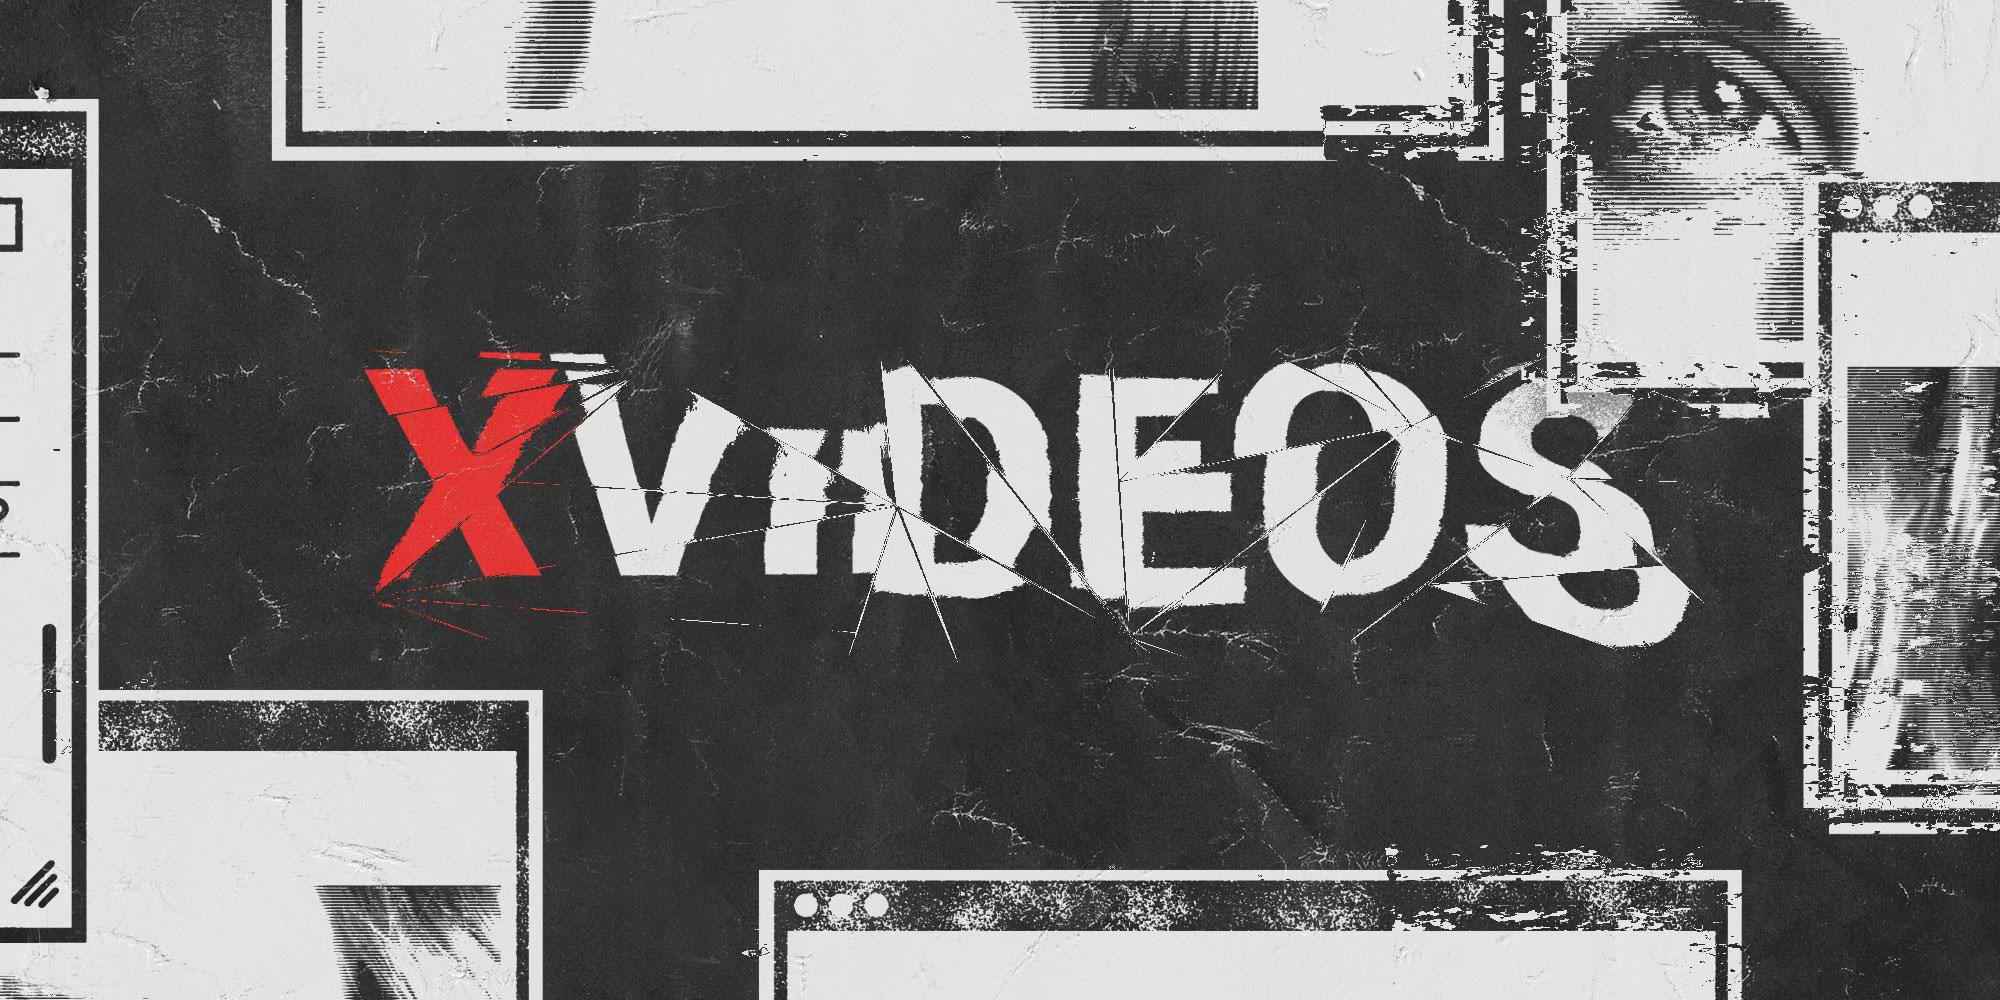 Xvideosdownlods - XVideos, World's Most Popular Porn Site, Reportedly Hosts Nonconsensual  Content & Child Exploitation